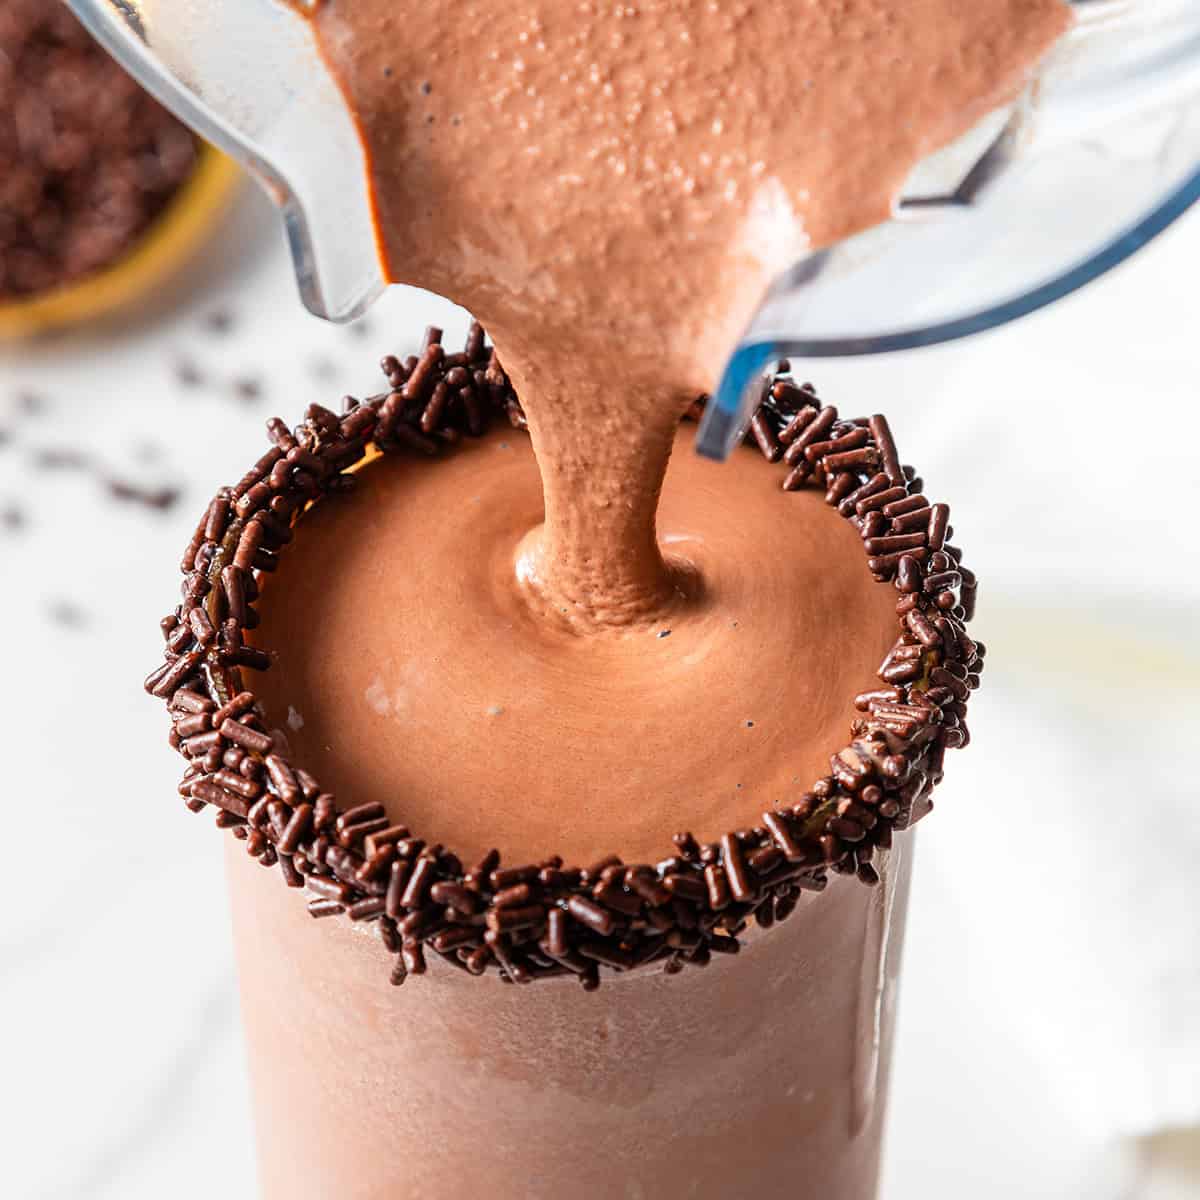 chocolate milkshake being poured from a blender container to a glass with a rim of chocolate sprinkles